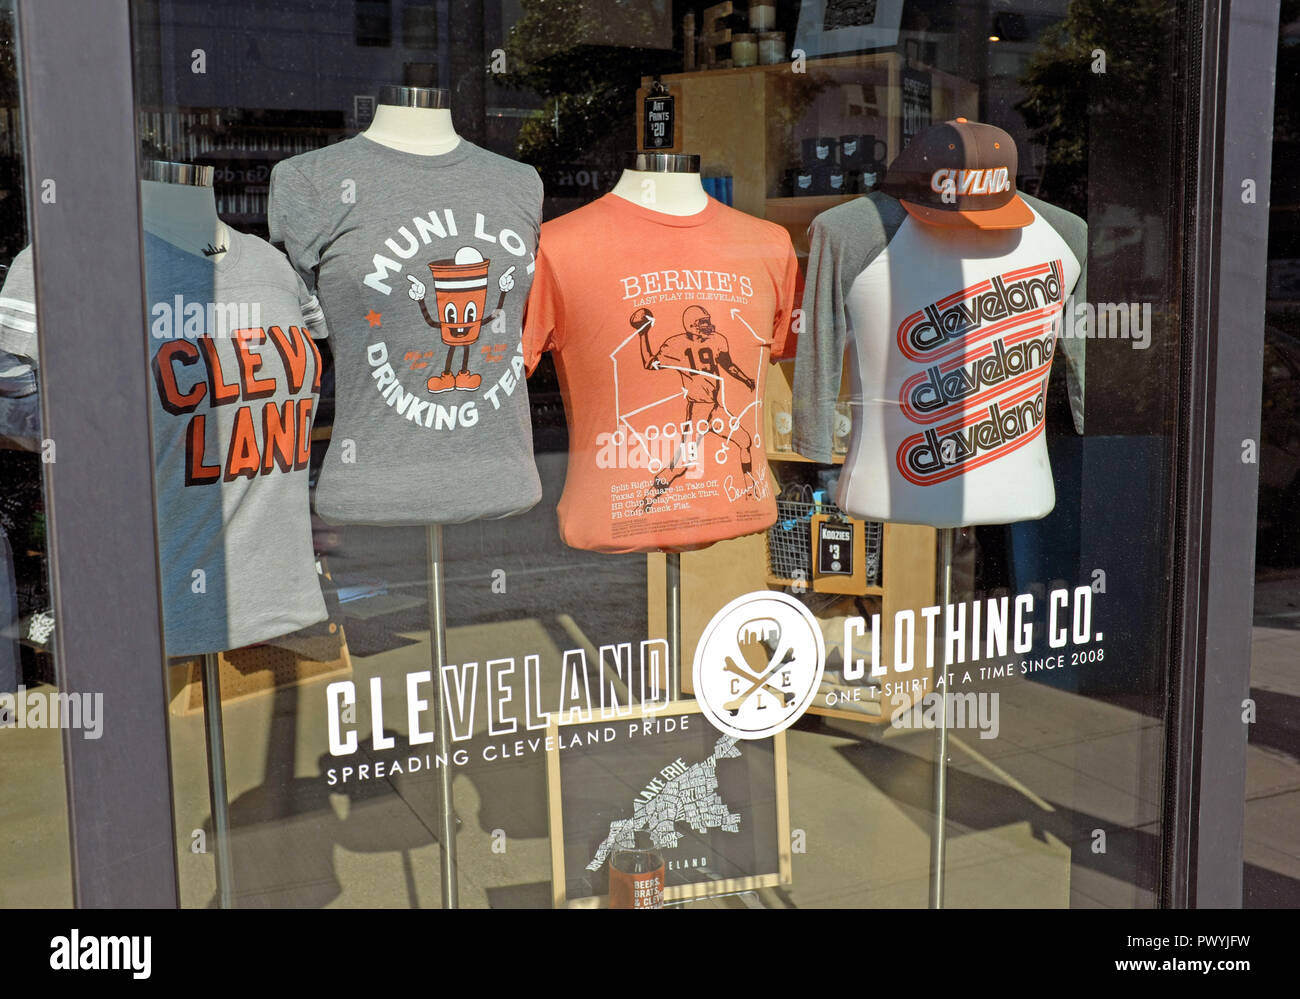 A window display along Euclid Avenue in Cleveland, Ohio shows t-shirts extolling Cleveland pride by the Cleveland Clothing Company. Stock Photo